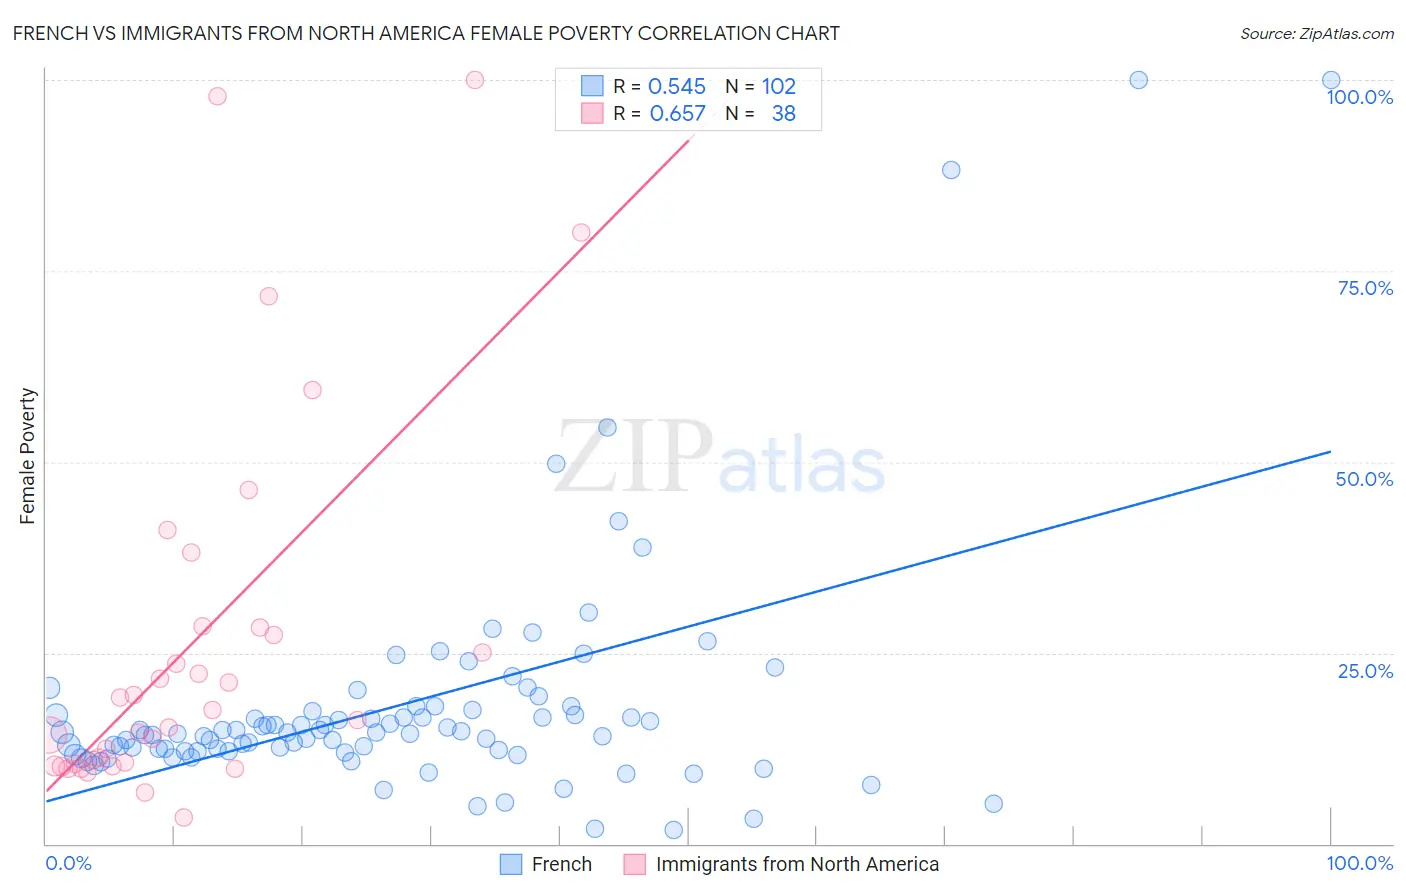 French vs Immigrants from North America Female Poverty